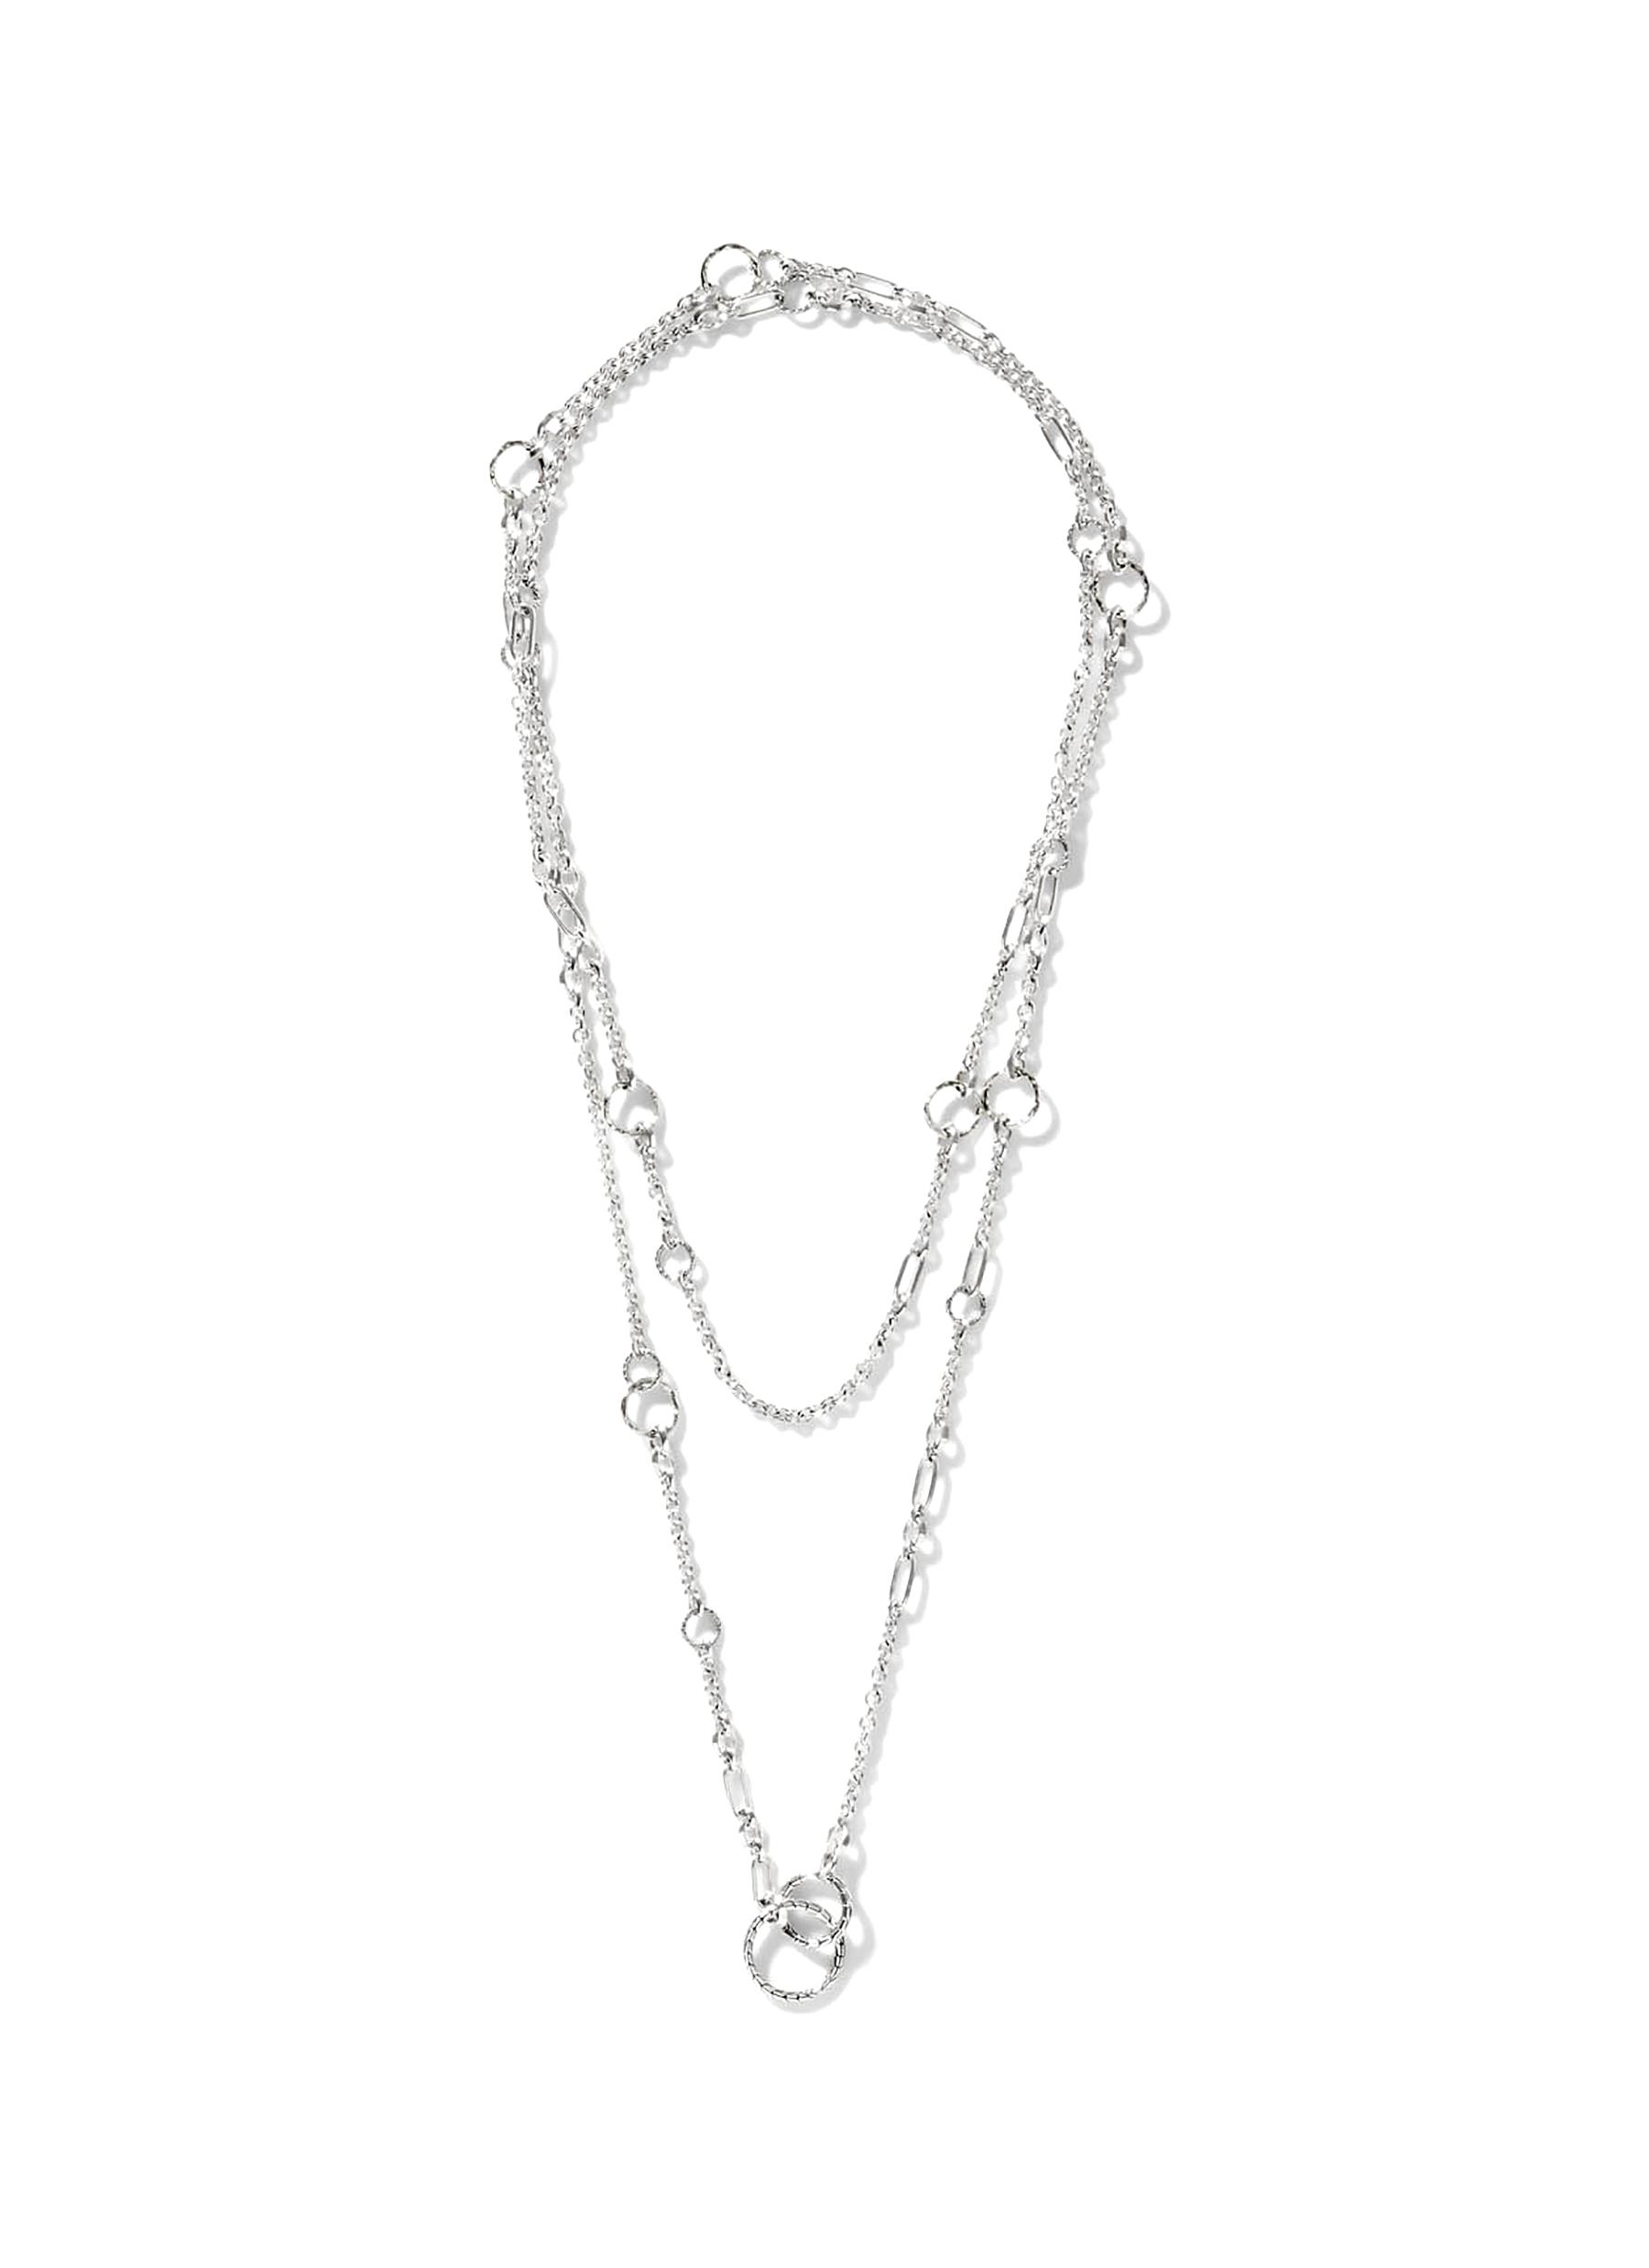 JOHN HARDY ‘CLASSIC CHAIN' STERLING SILVER HAMMERED SAUTOIR NECKLACE